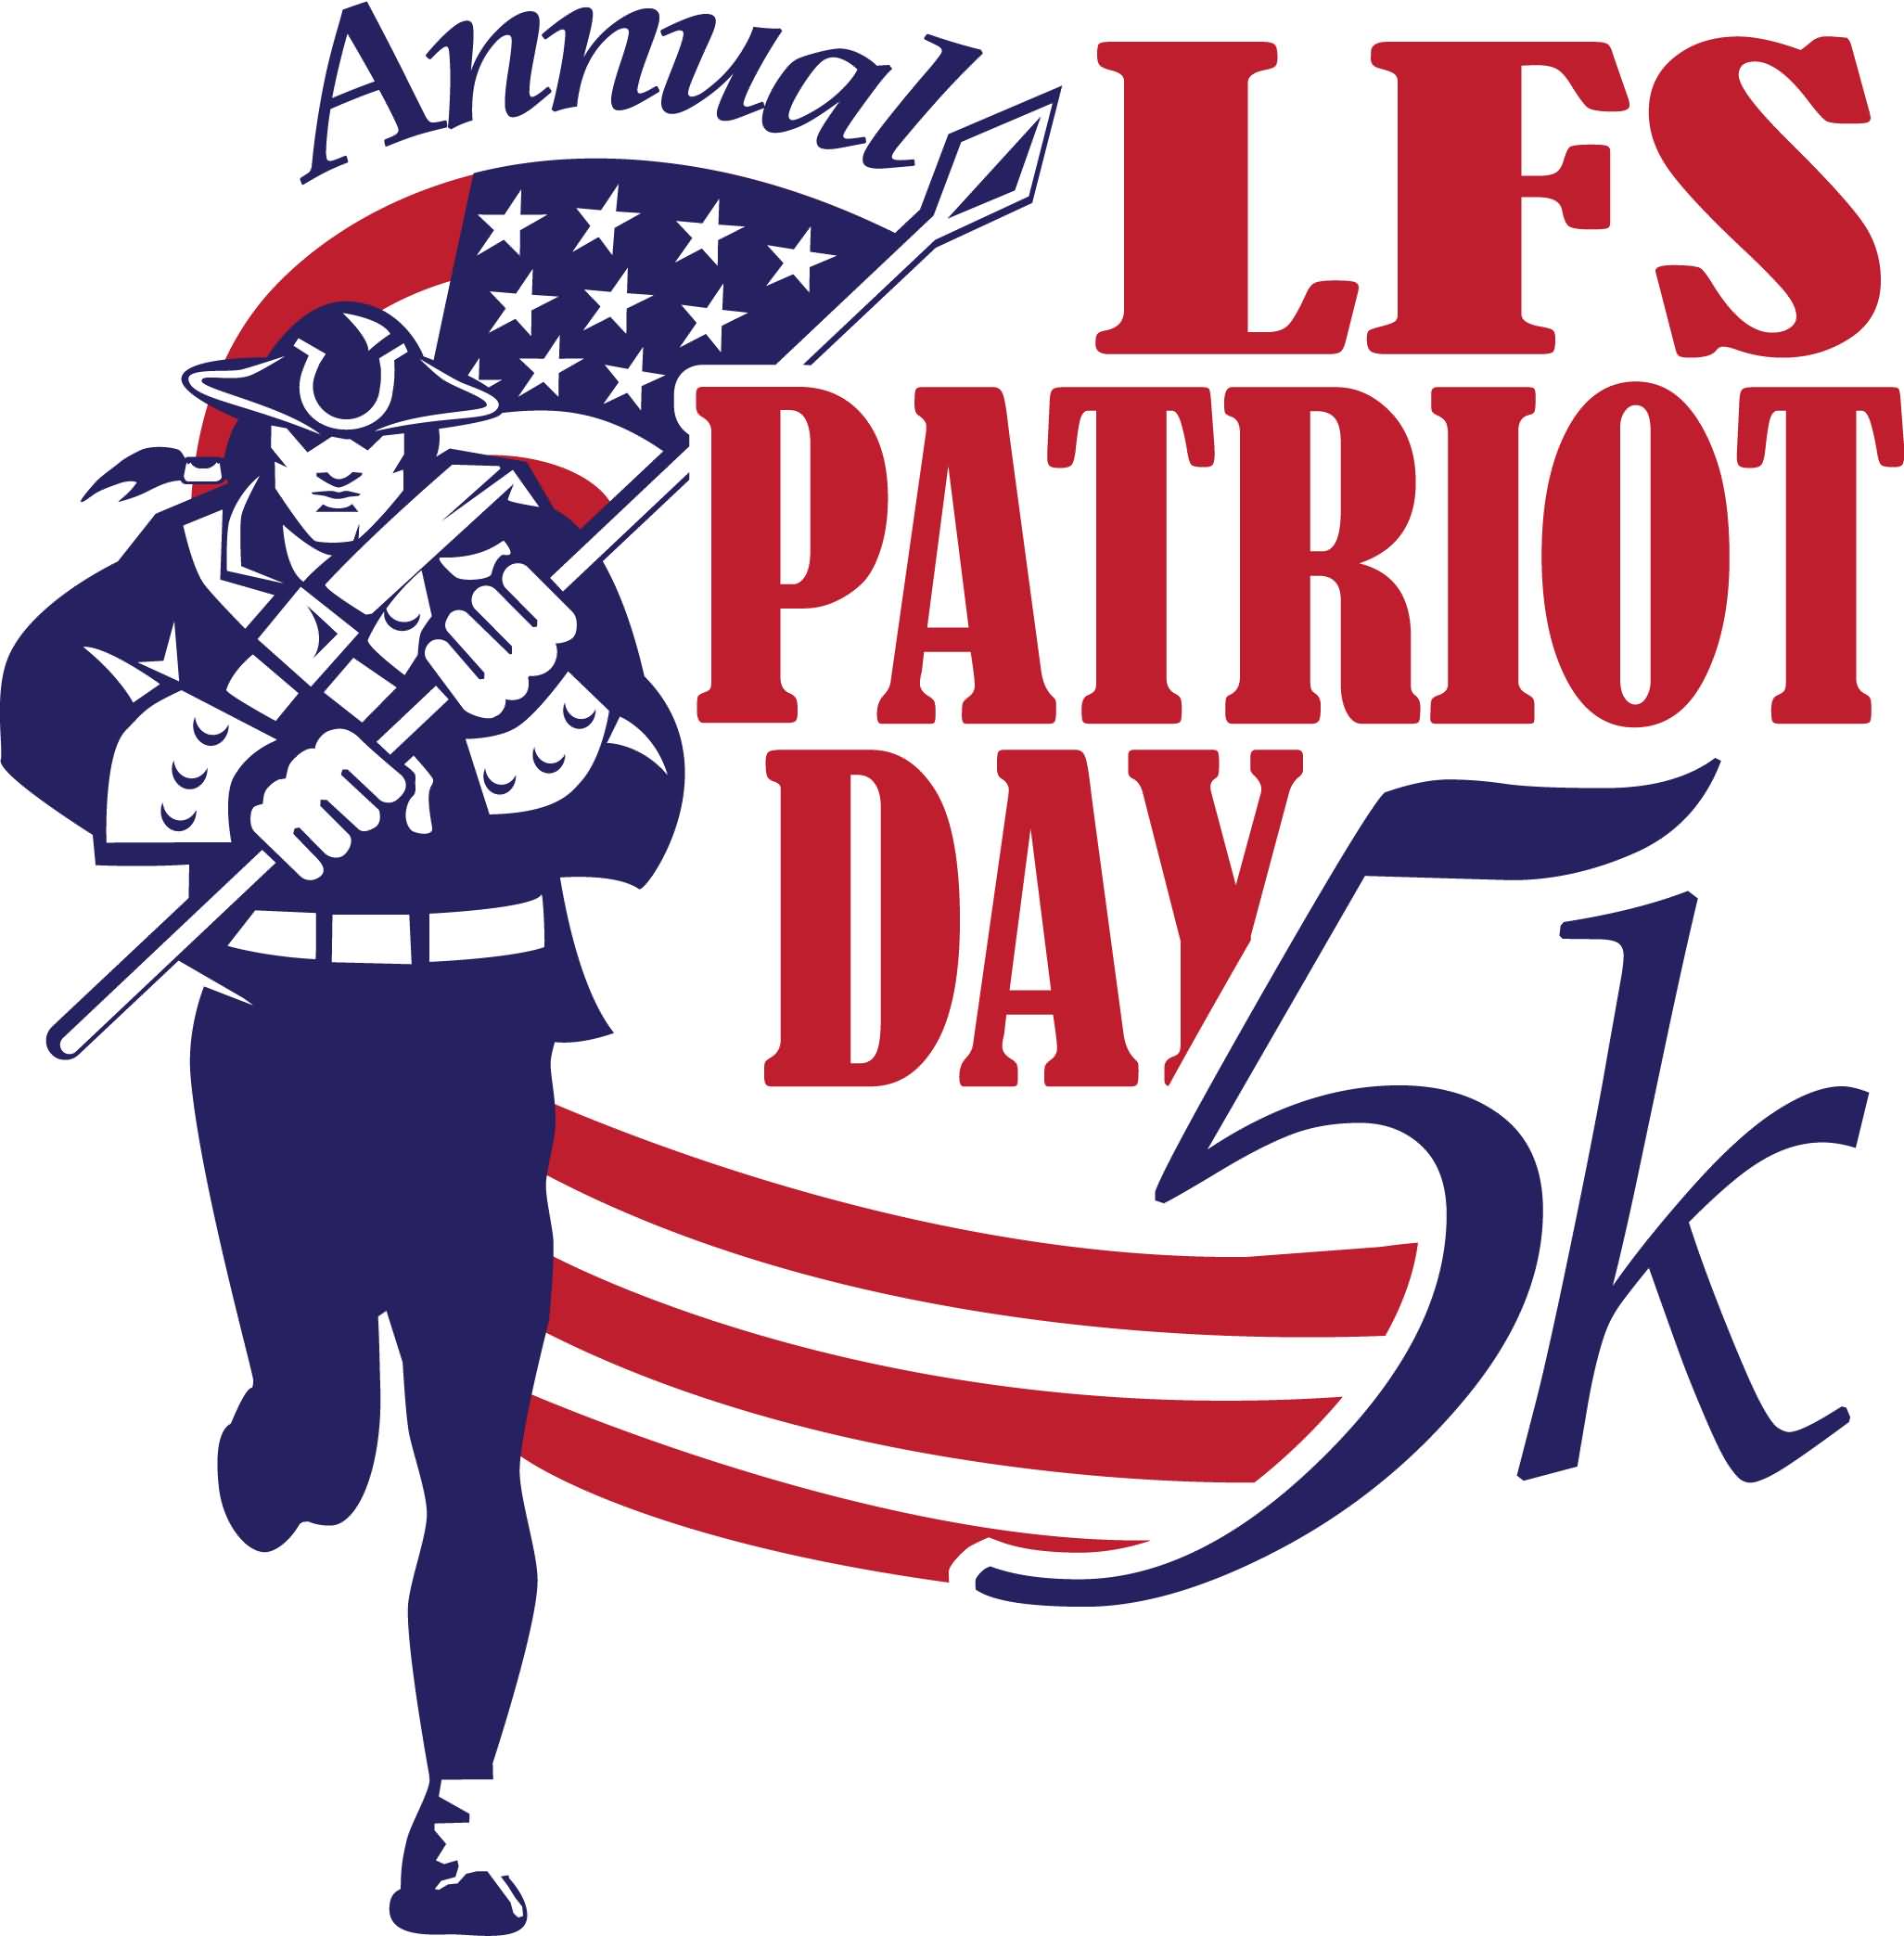 Annual Patriot Day 5K Man With Flag